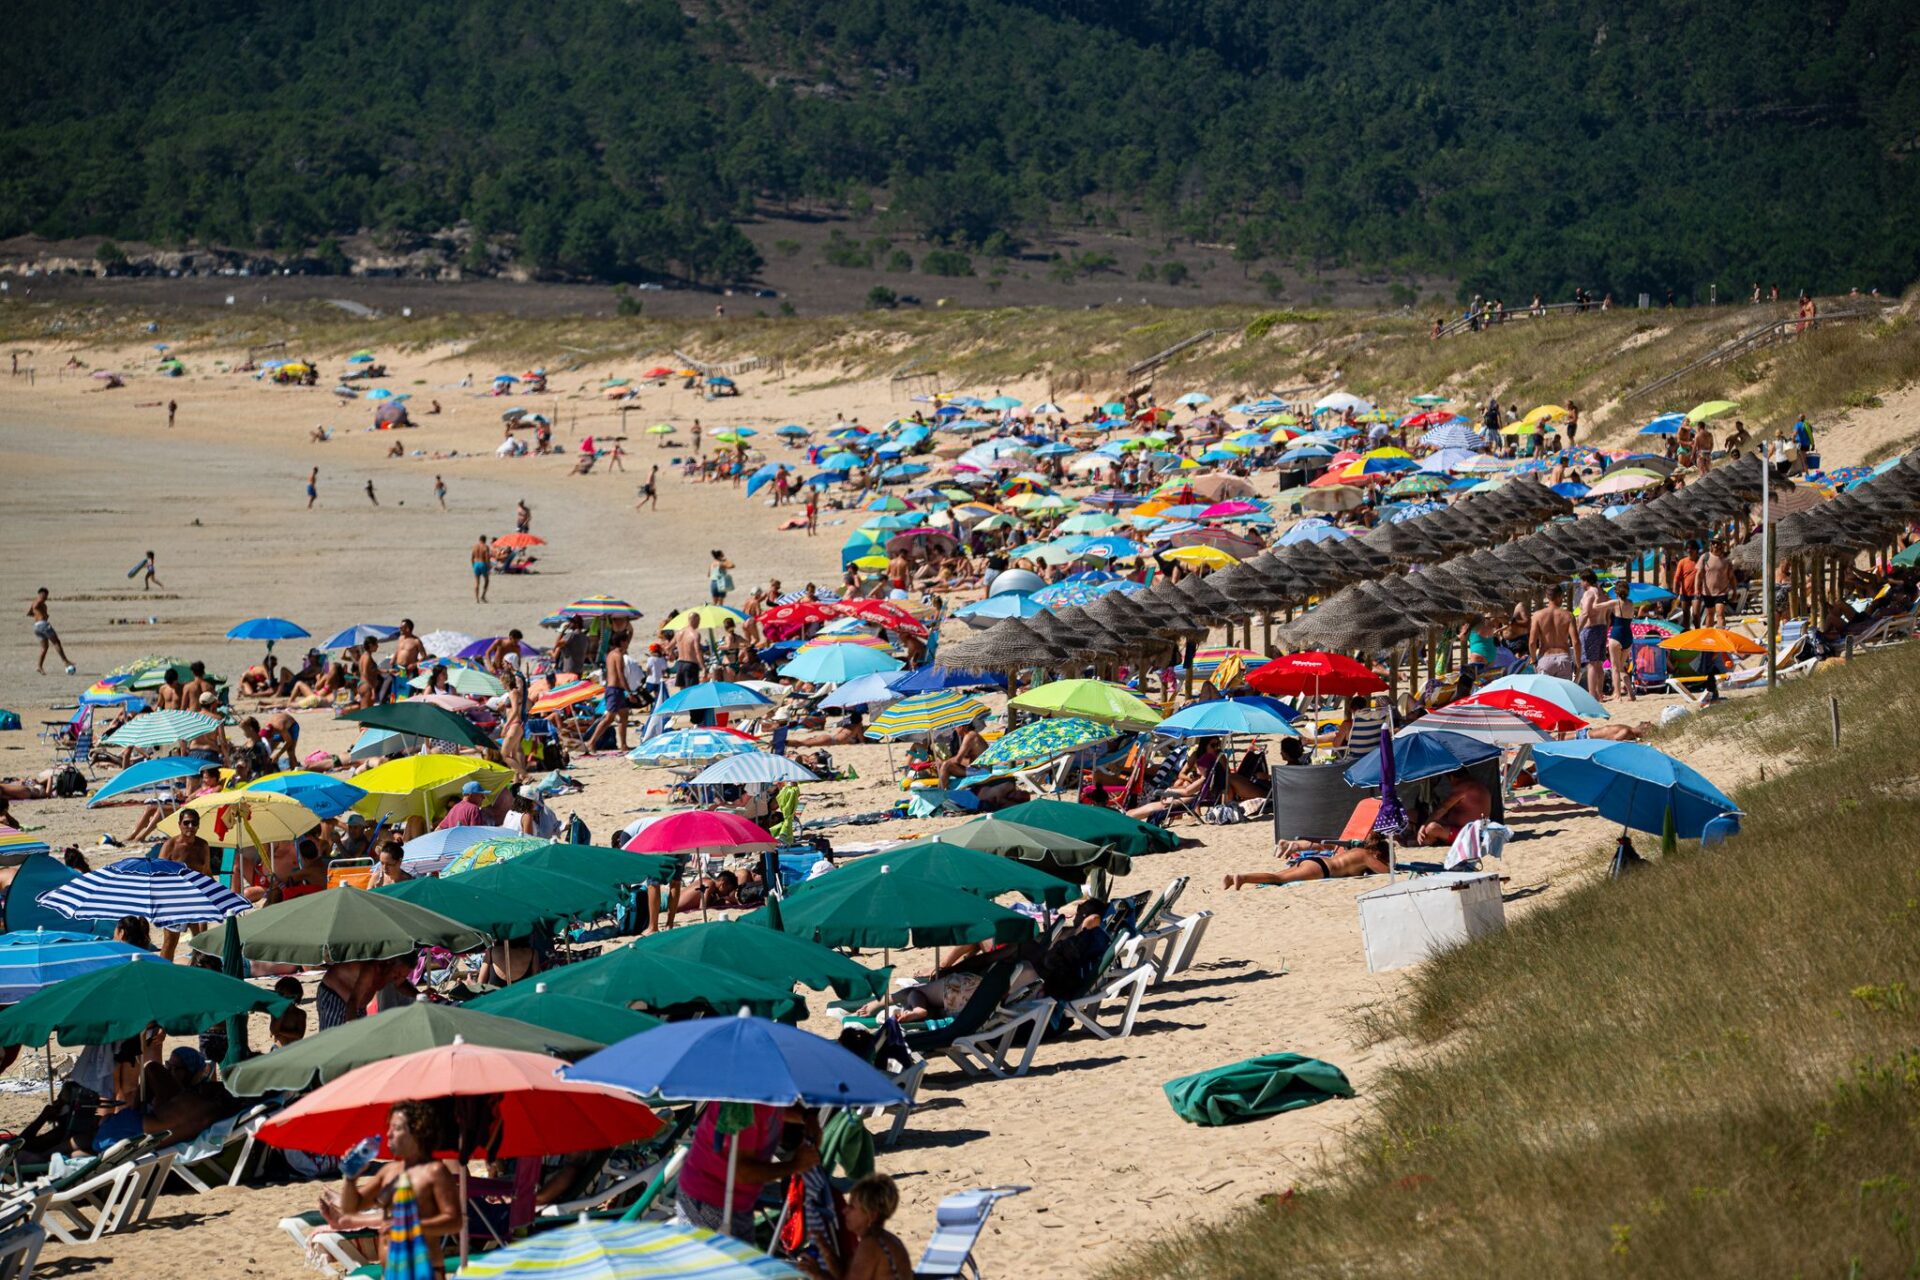 Several people take shelter from the sun under umbrellas on a beach in Pontevedra. Spain is being hit by the fourth heatwave of the summer and it is expected to continue at least until Thursday with an increased risk of forest fires, the weather service AEMET said on Monday.